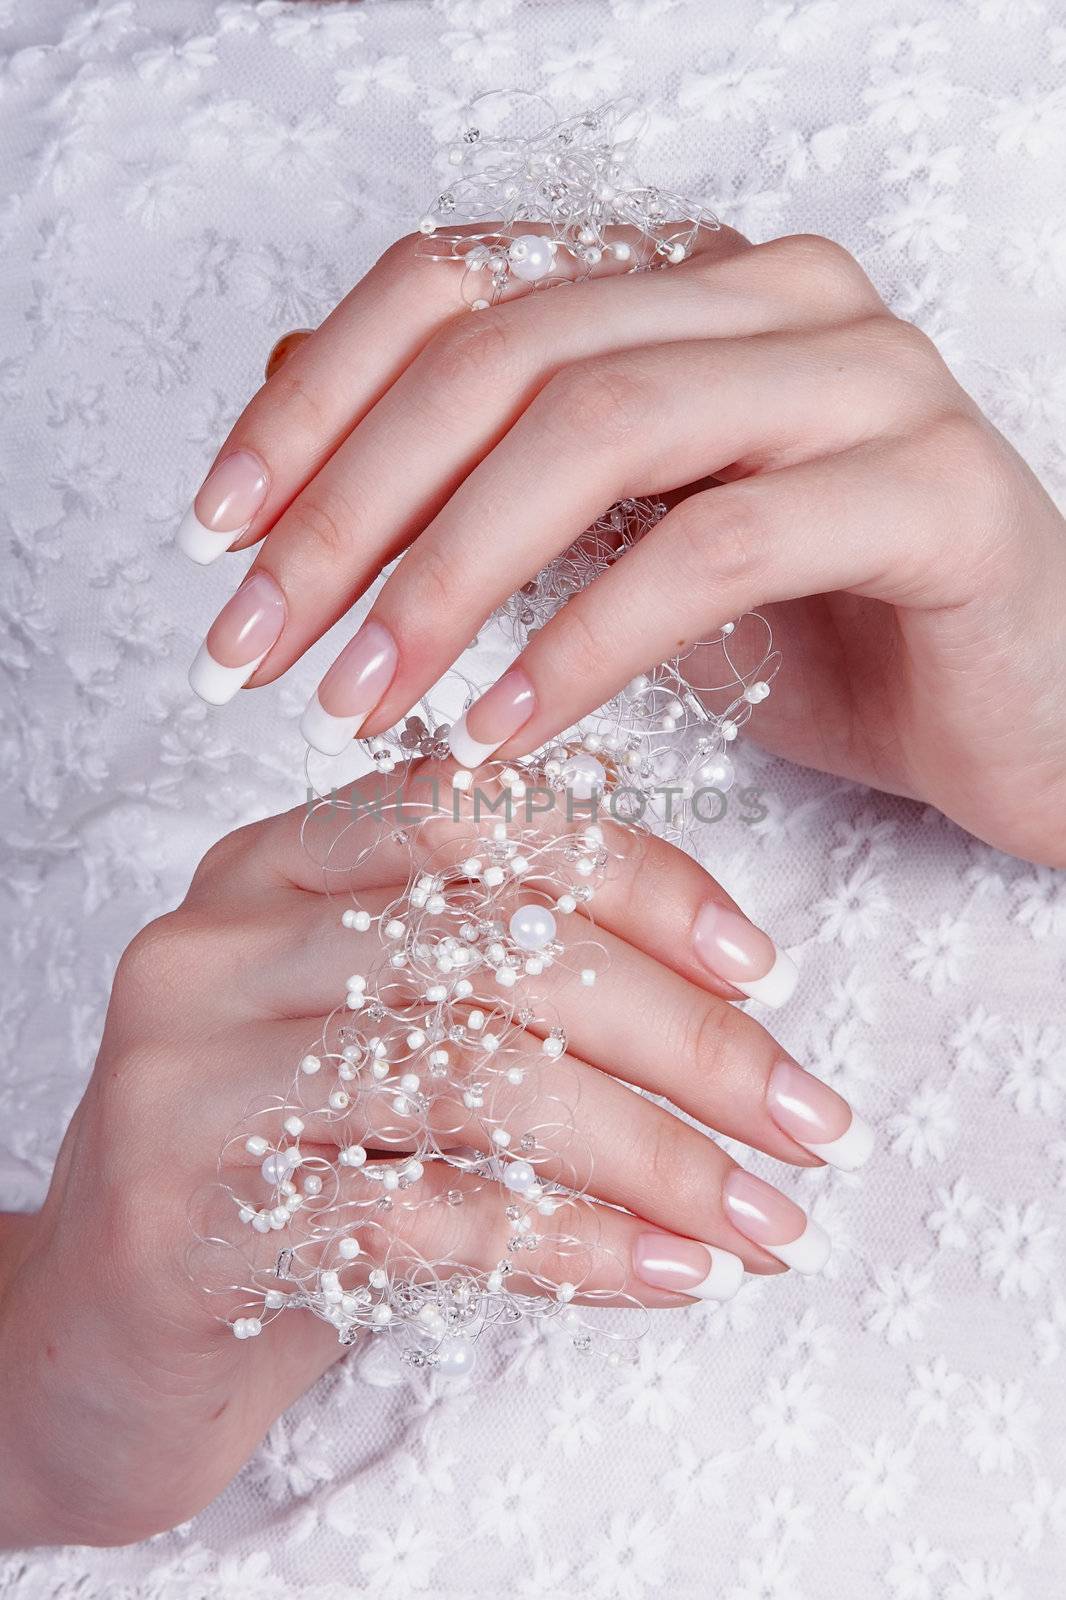 Beautiful female hands with manicure against a white dress